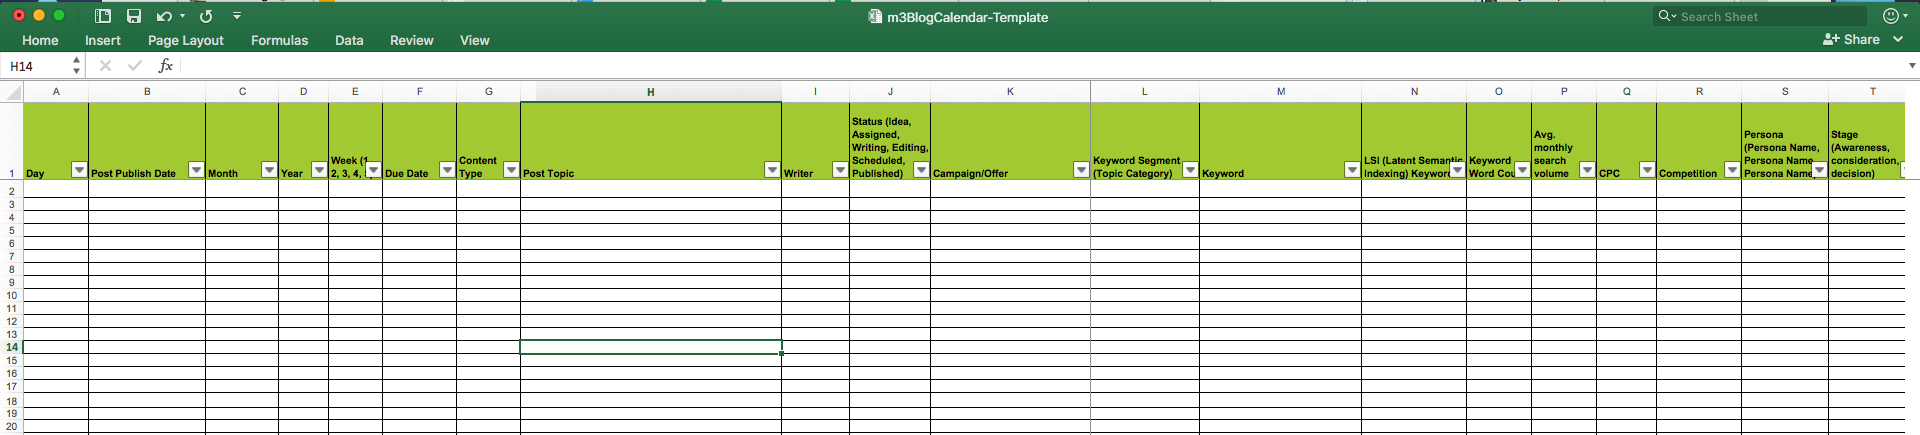 Content Calendar Spreadsheet In Editorial Calendar Templates For Content Marketing: The Ultimate List